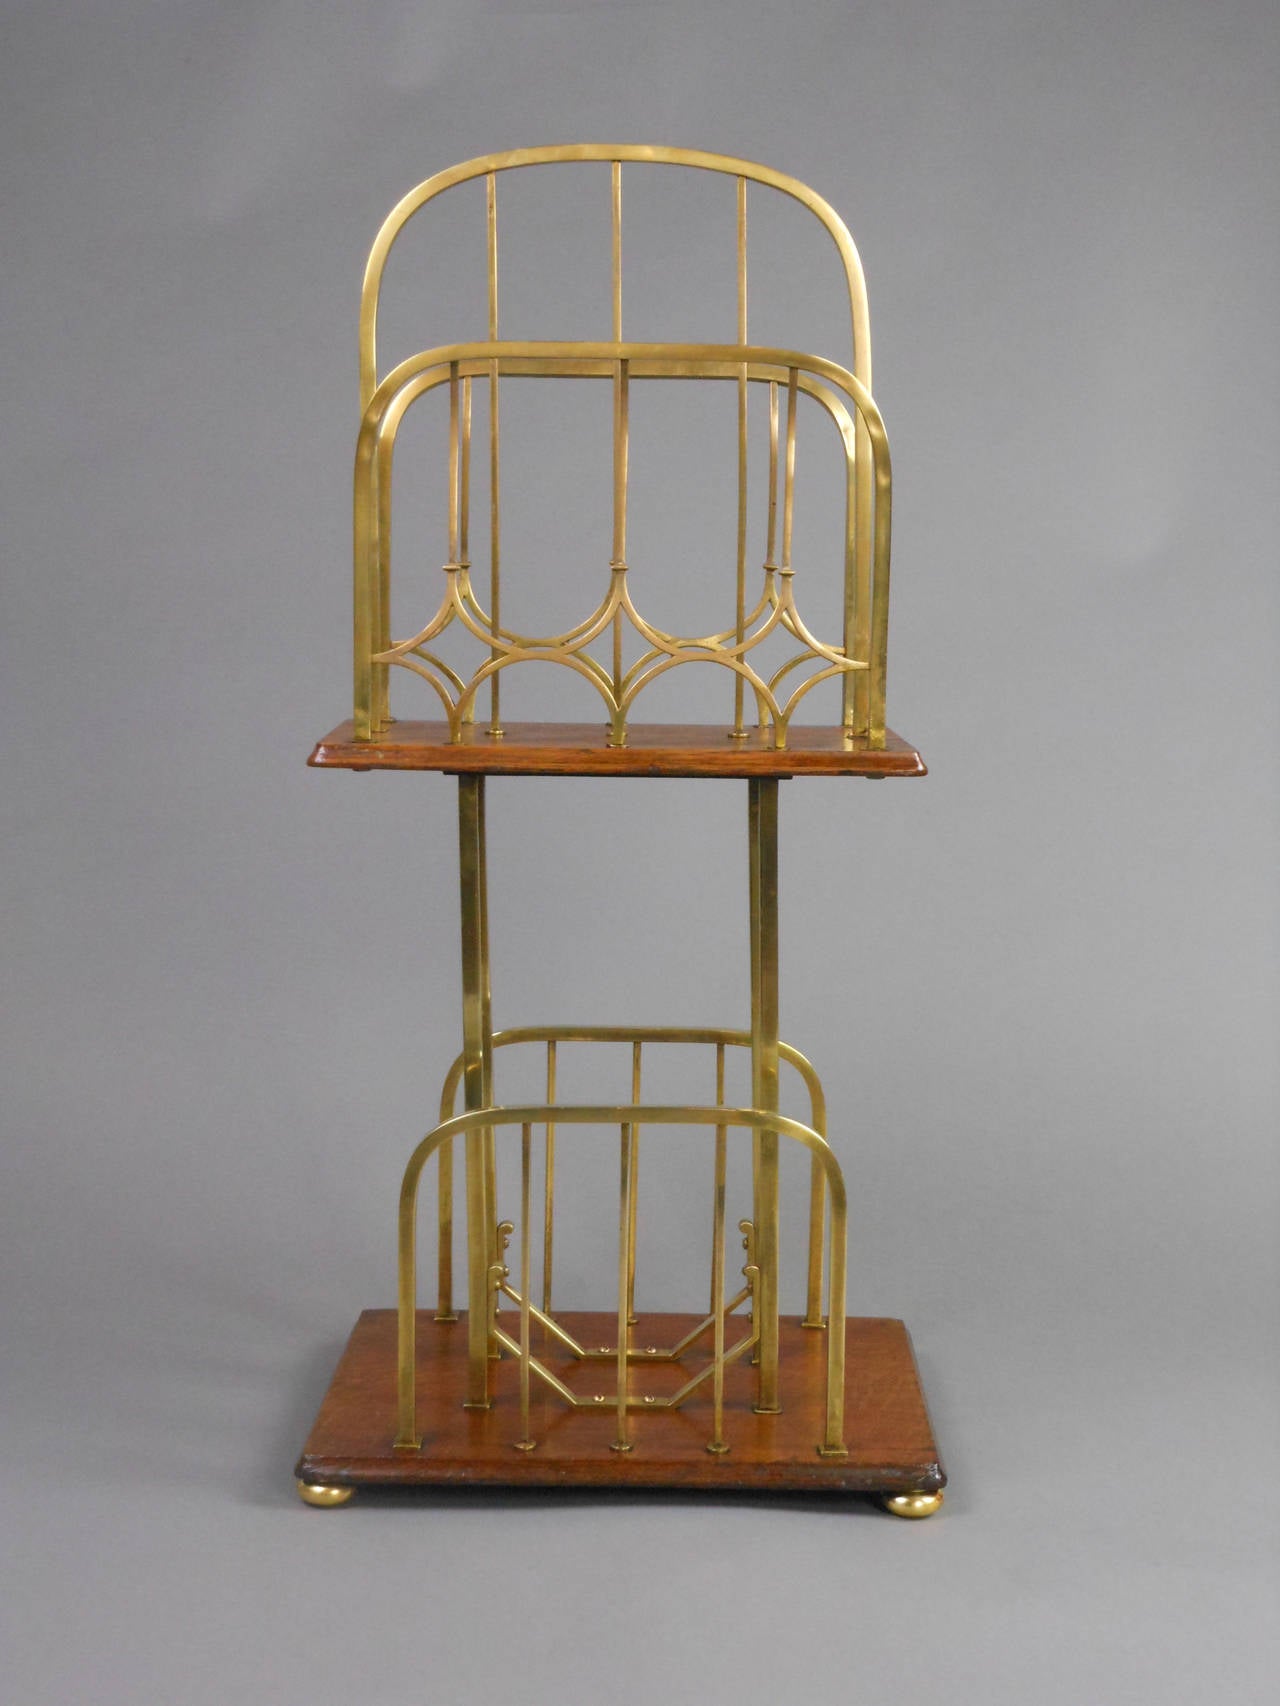 The Arts and Crafts period magazine rack has two oak shelves fitted with brass arched grills and bun feet.